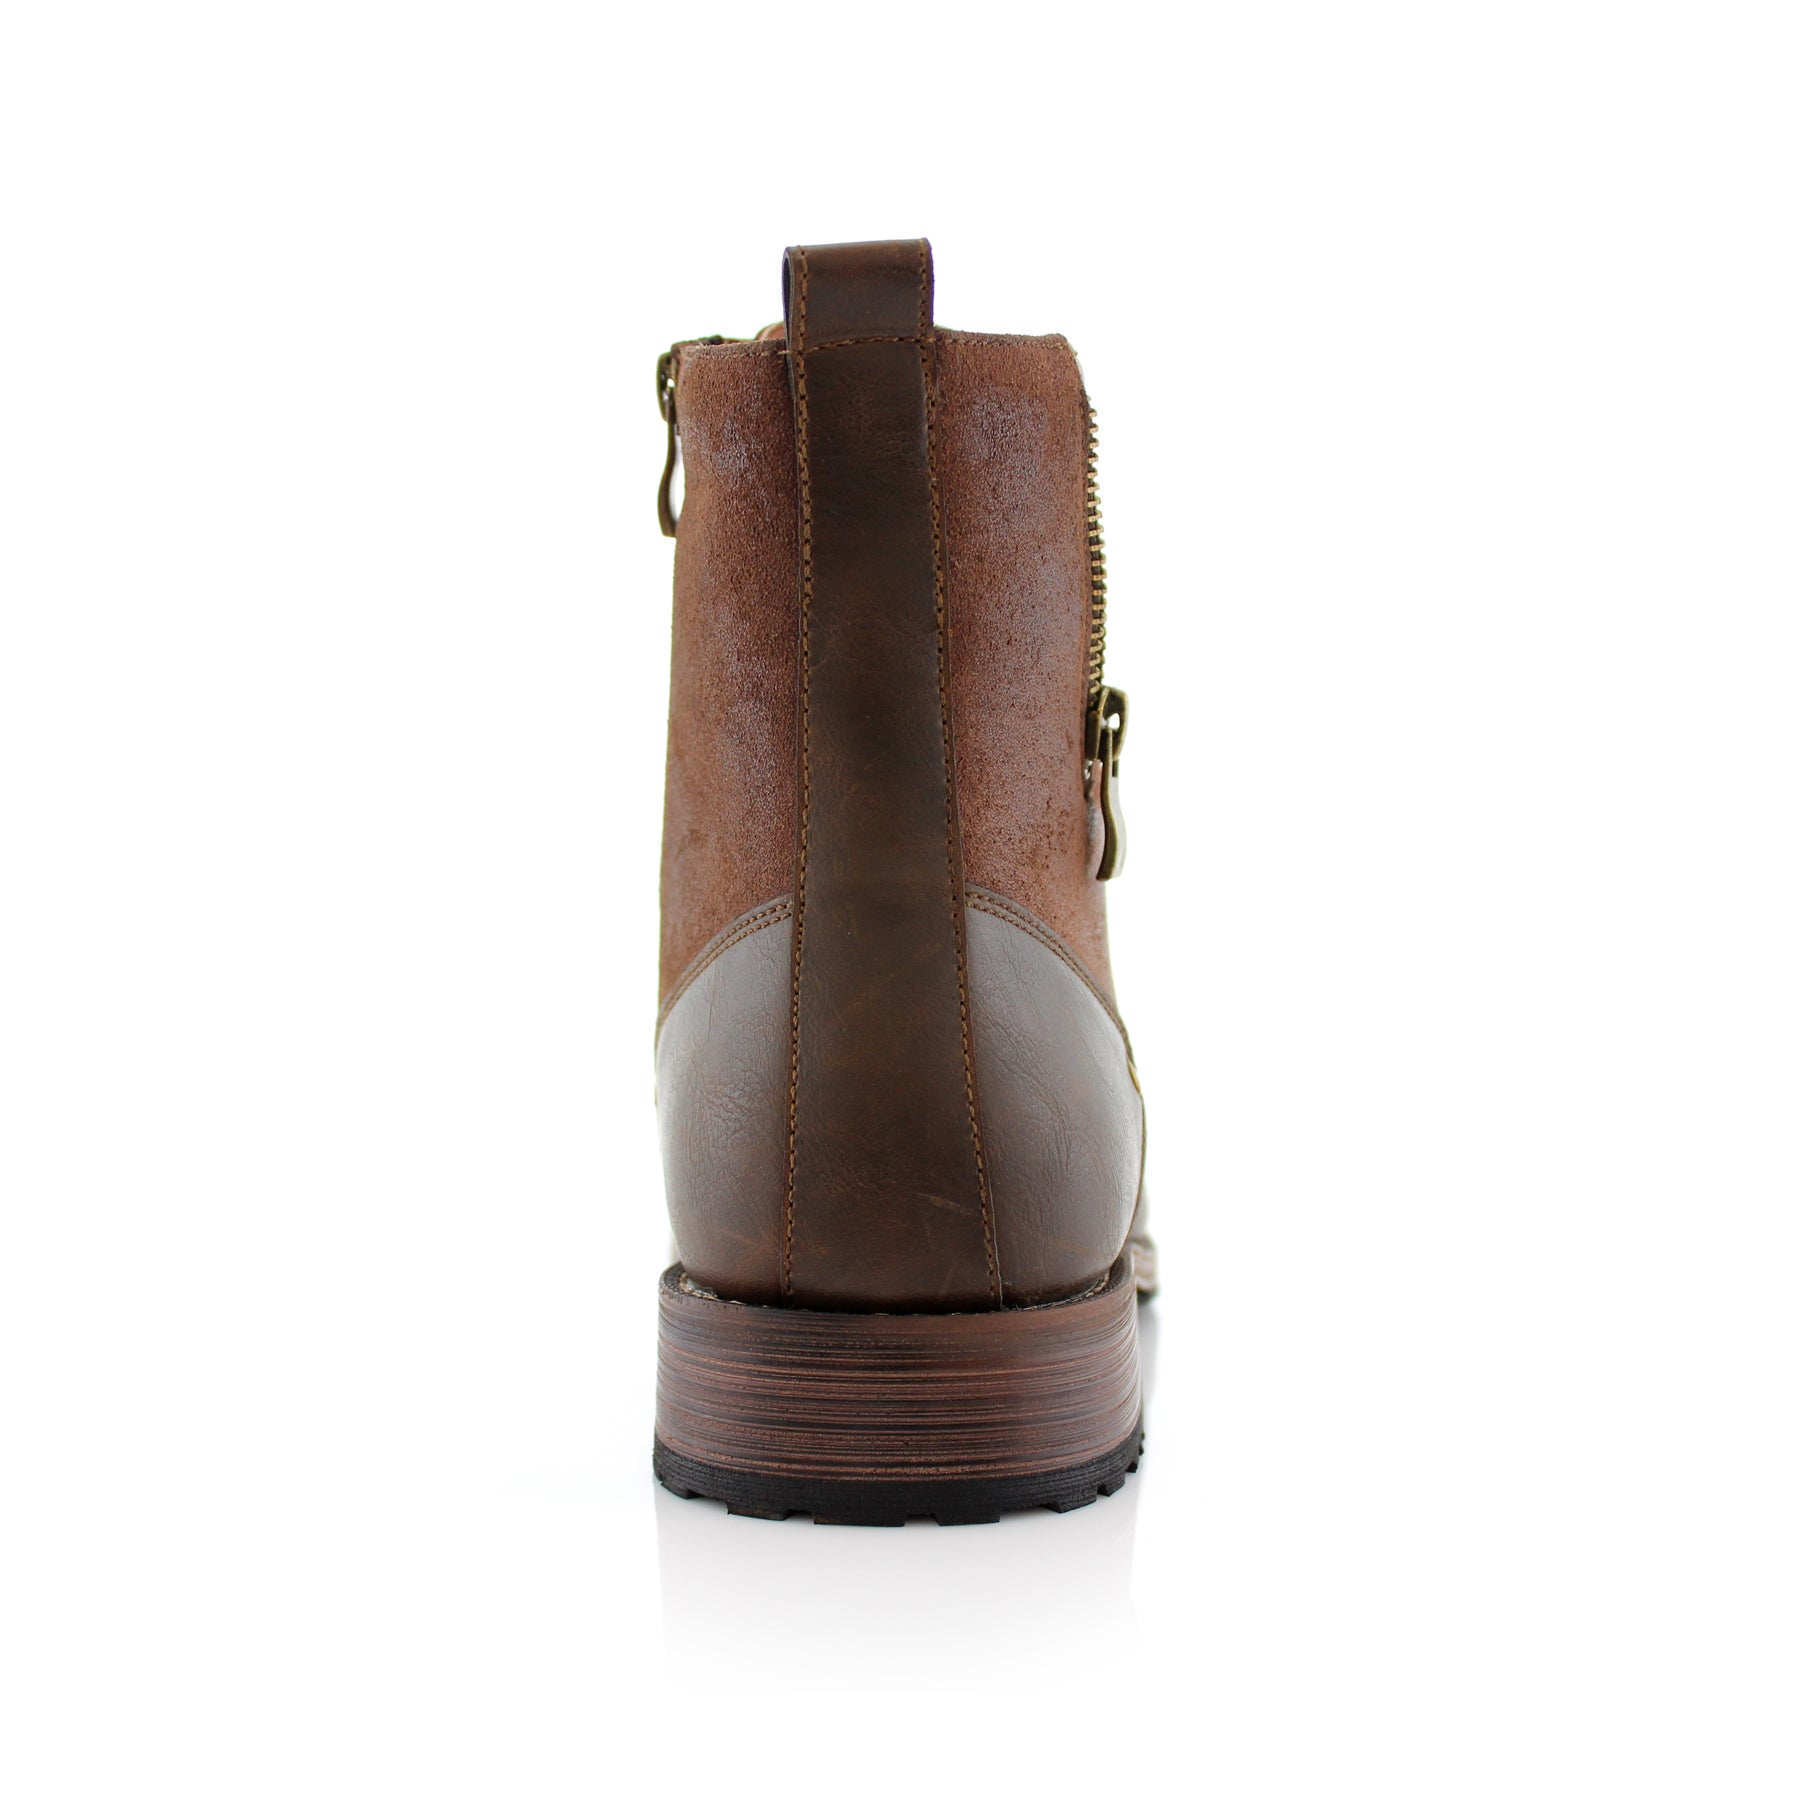 Duo-Textured Zippered Combat Boots | Jalen by Polar Fox | Conal Footwear | Back Angle View